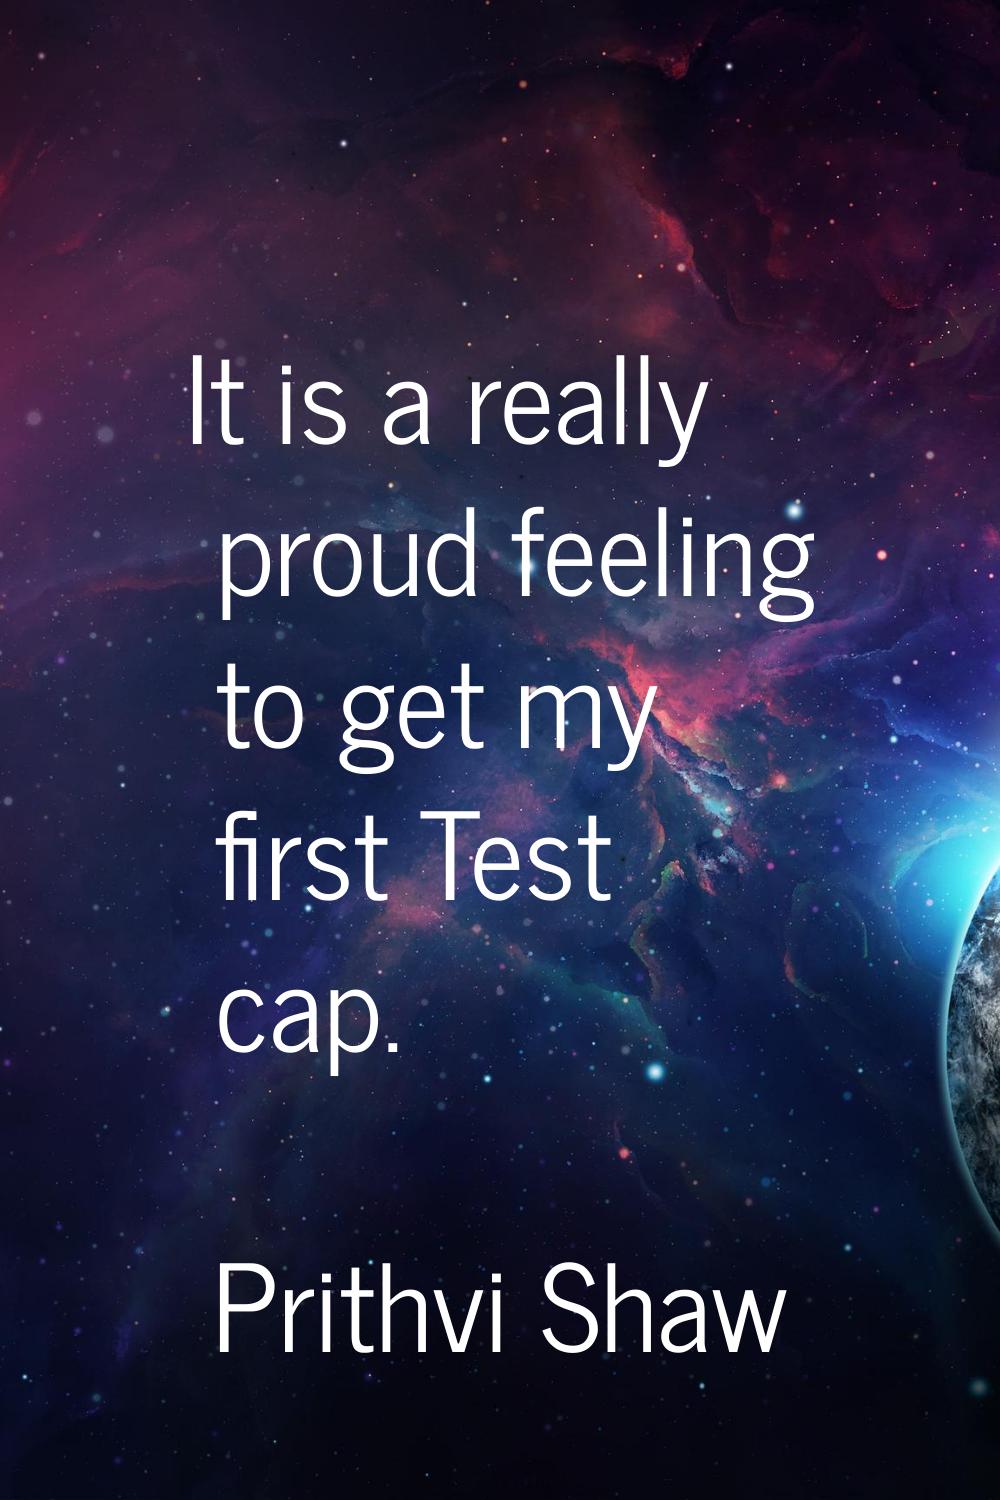 It is a really proud feeling to get my first Test cap.